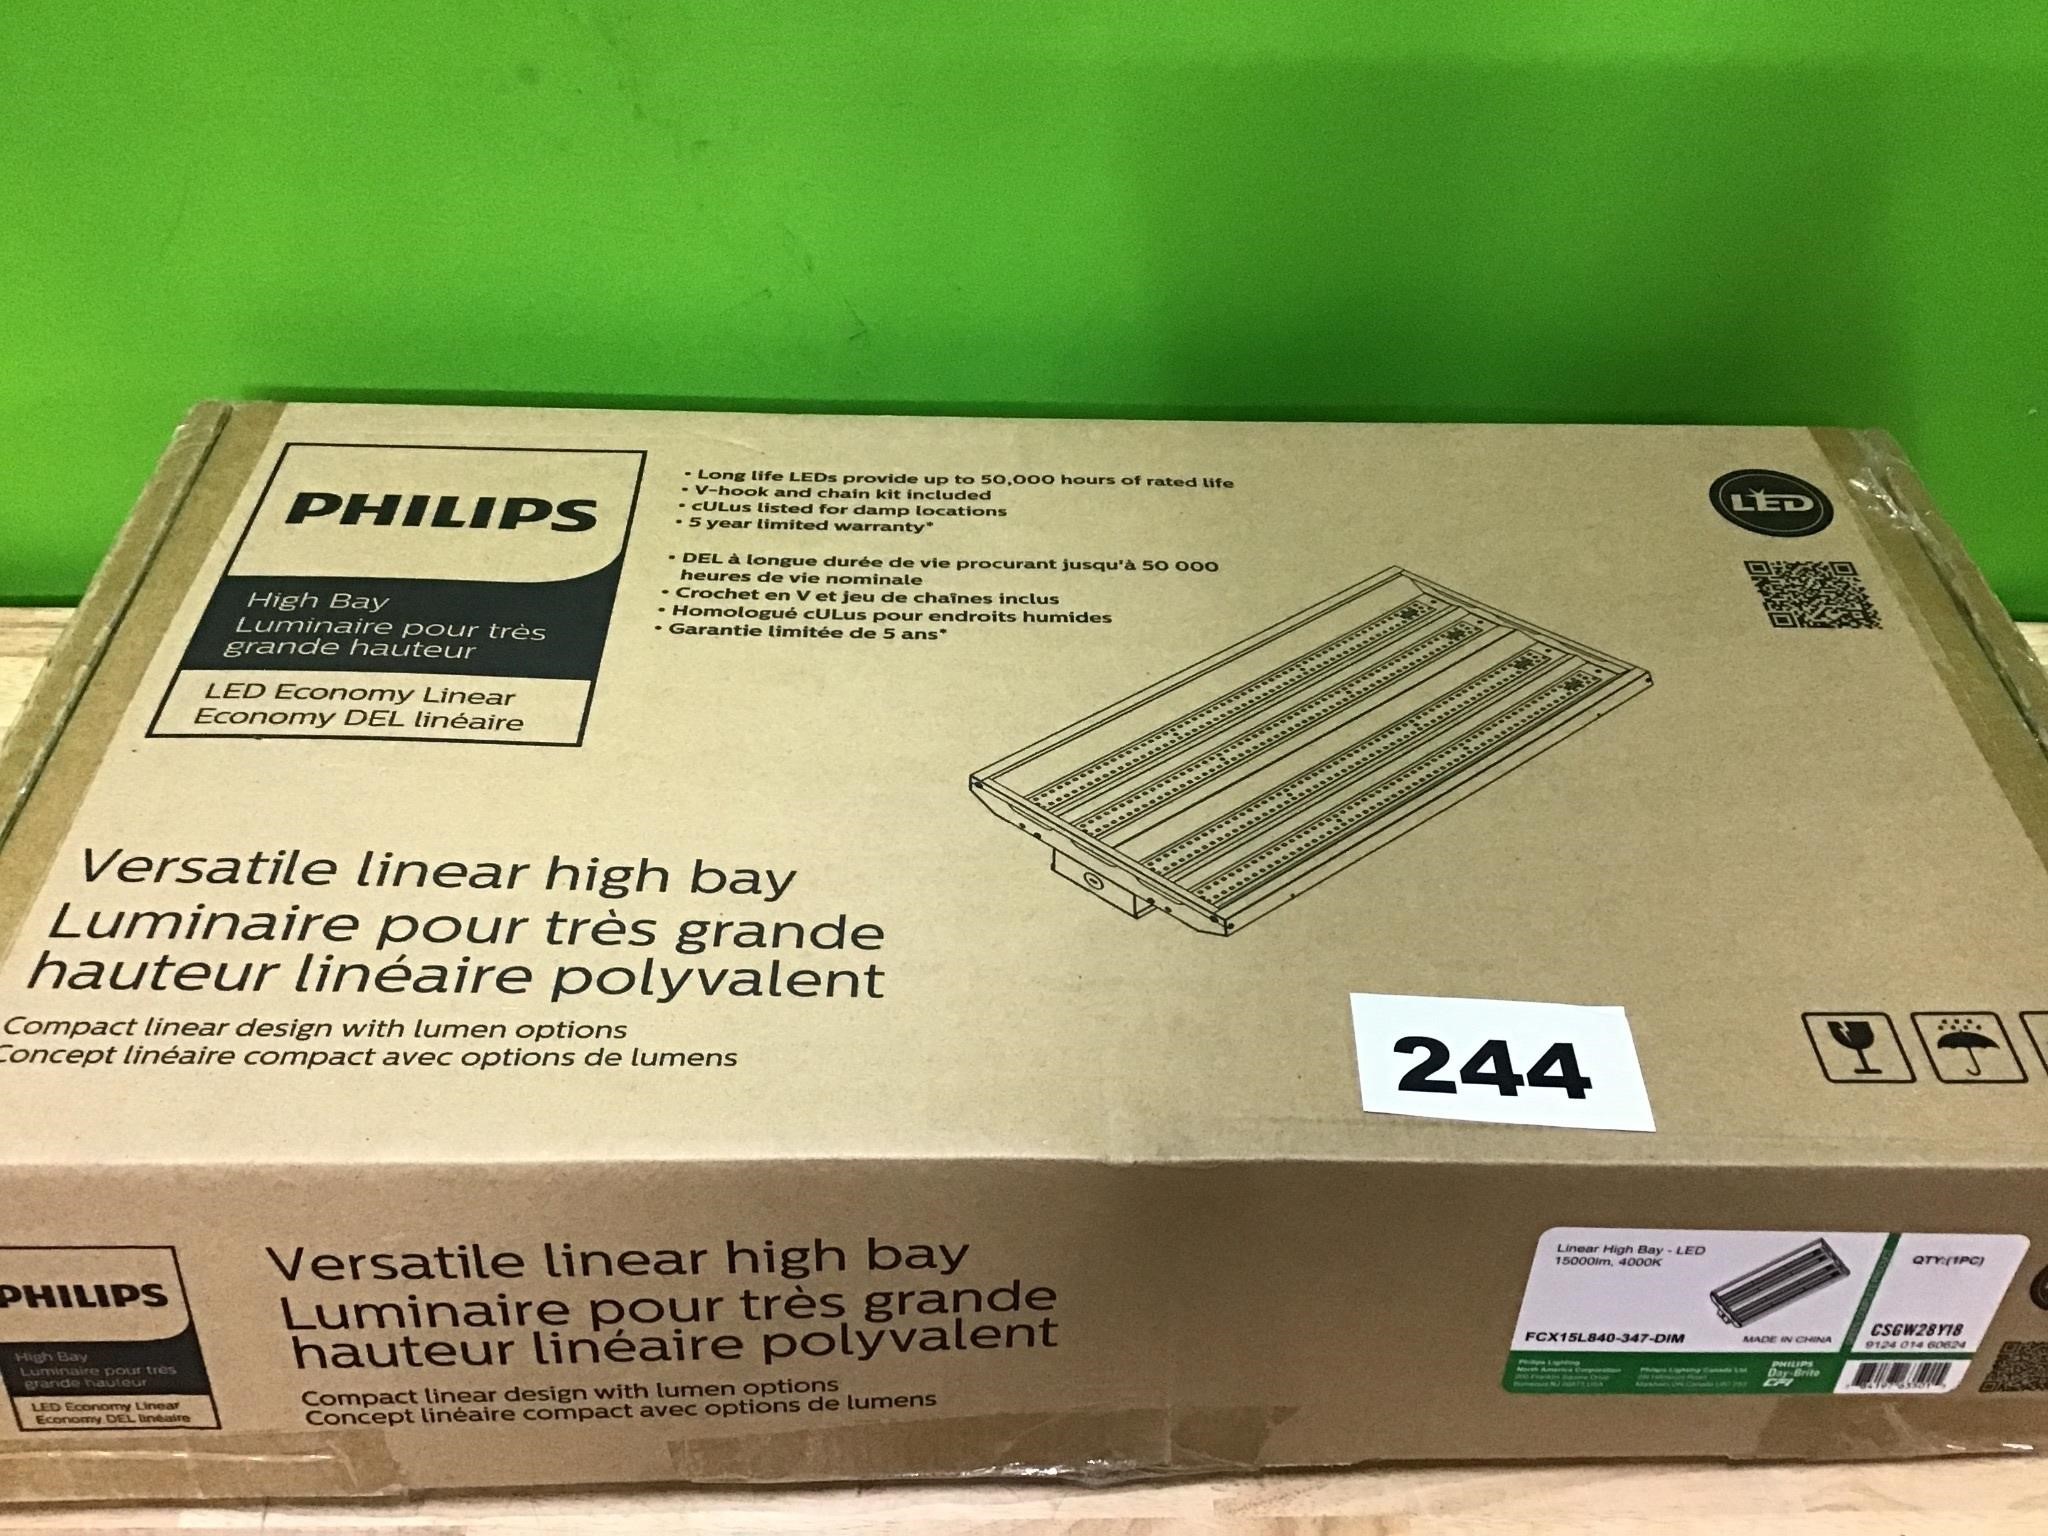 Philips High Bay Linear LED Light Fixture